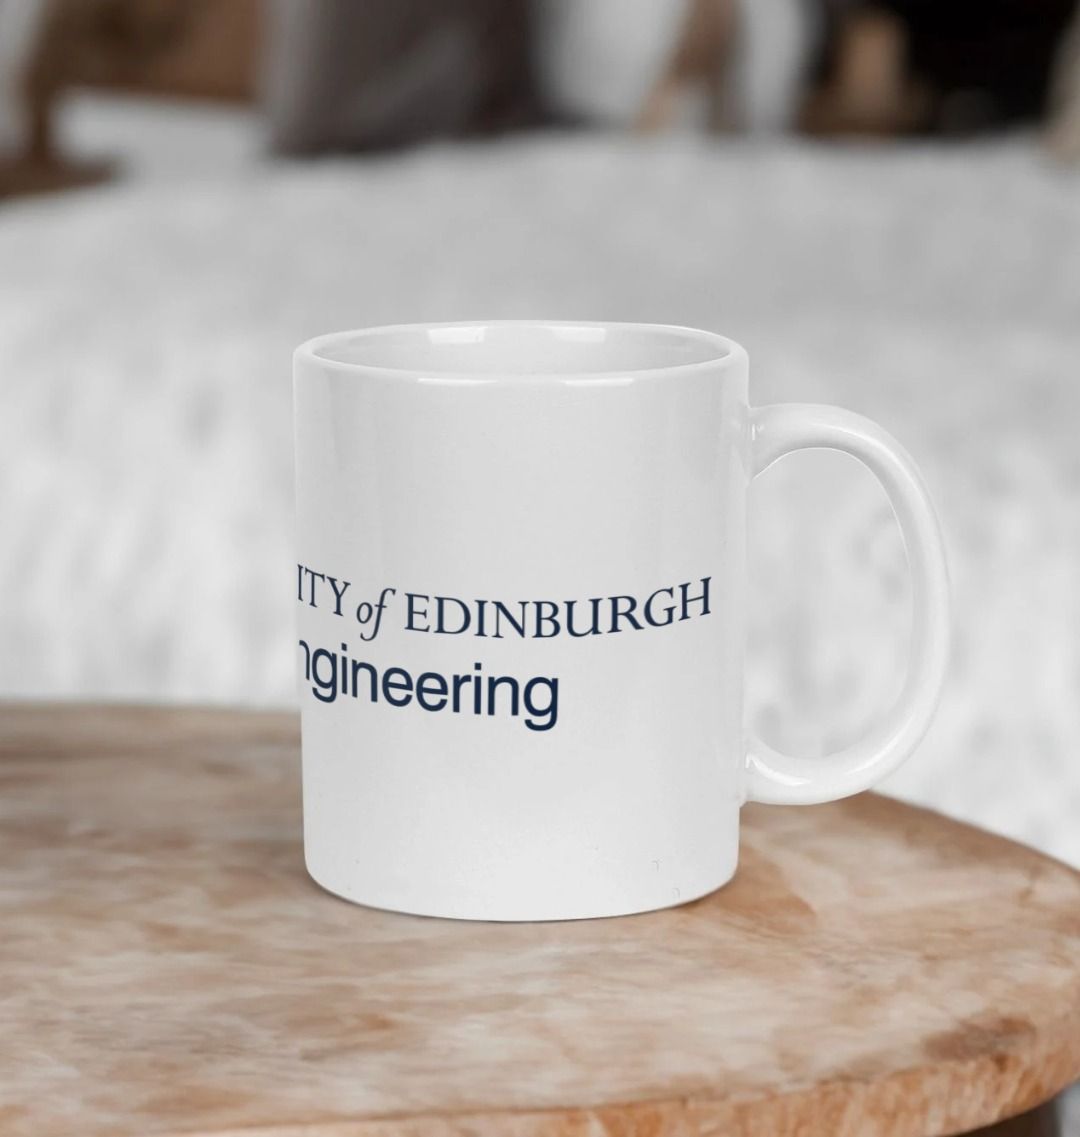 White School of Engineering mug with multi-colour printed University crest and logo